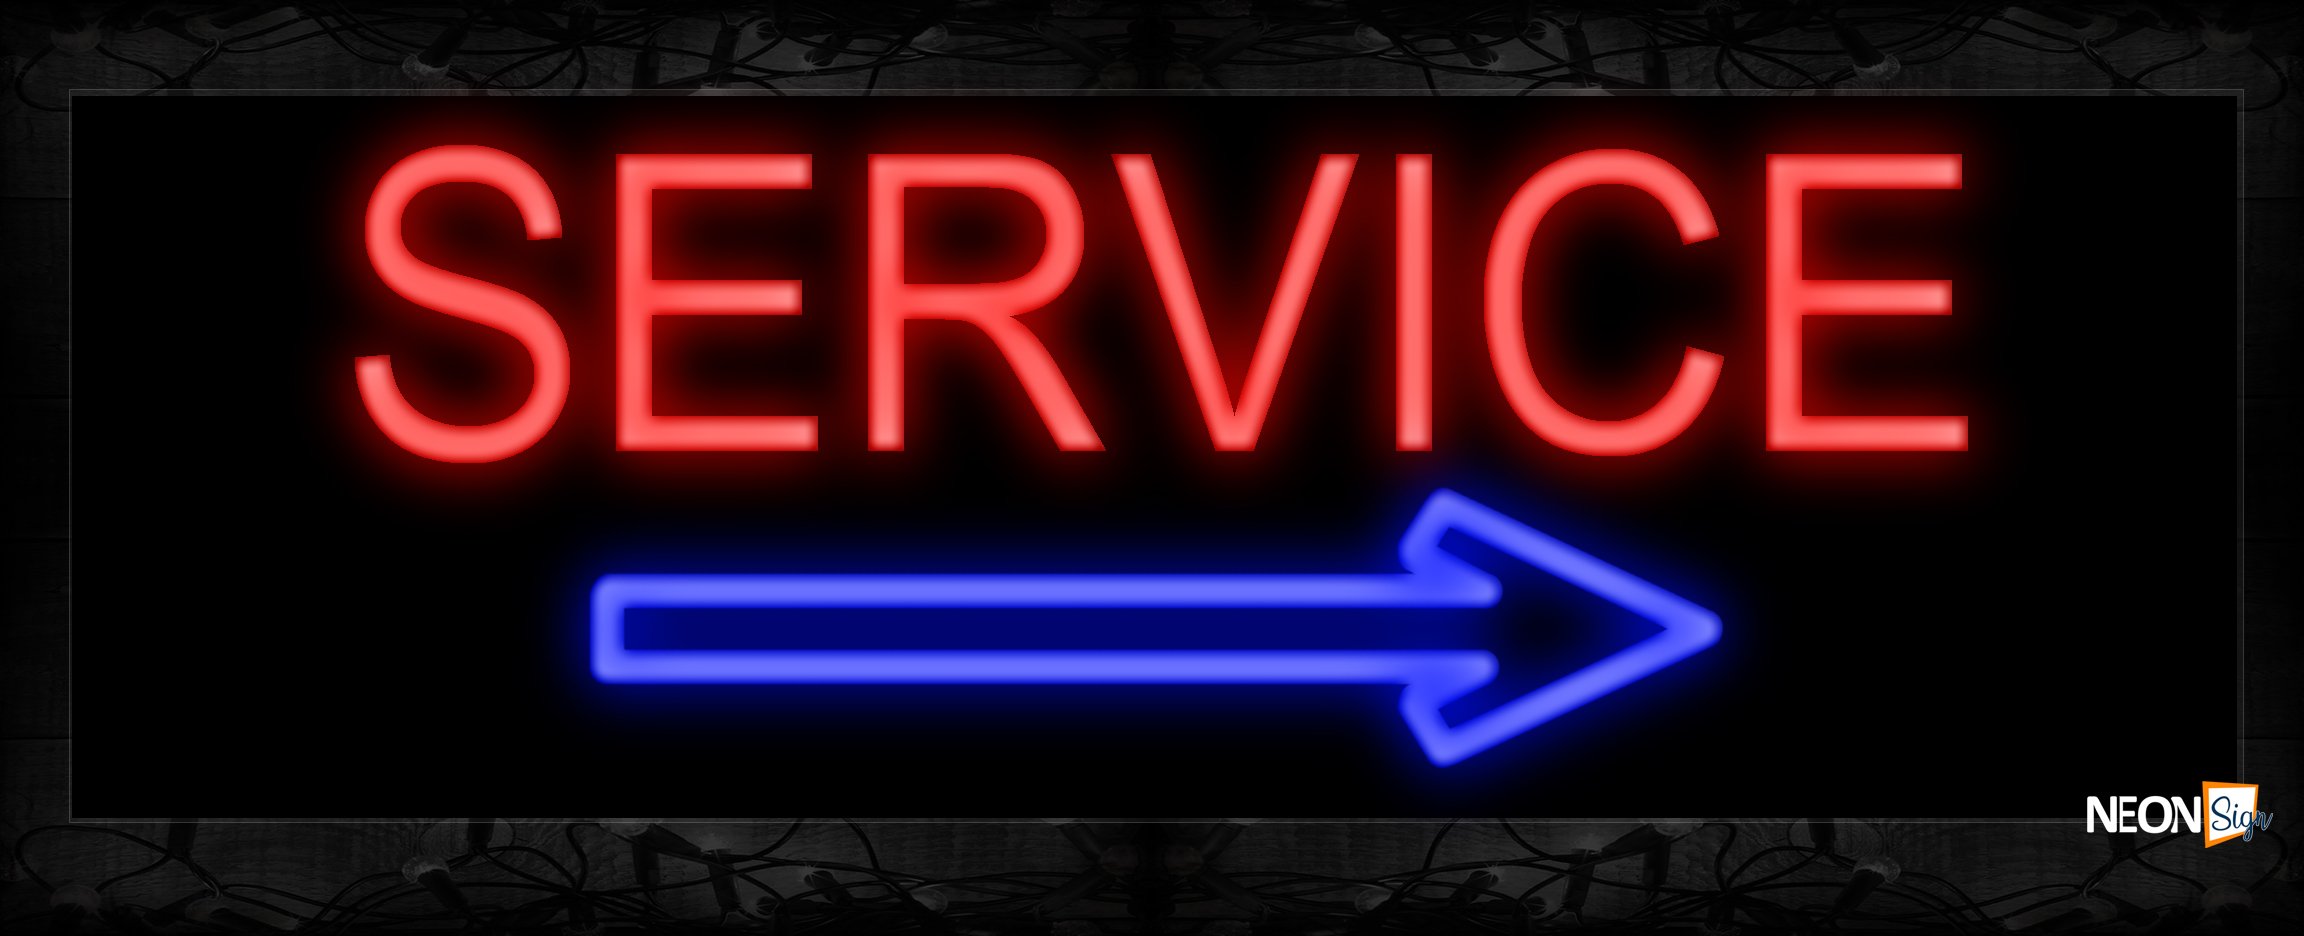 Image of 10624 Service in red with blue arrow Neon Sign 13x32 Black Backing